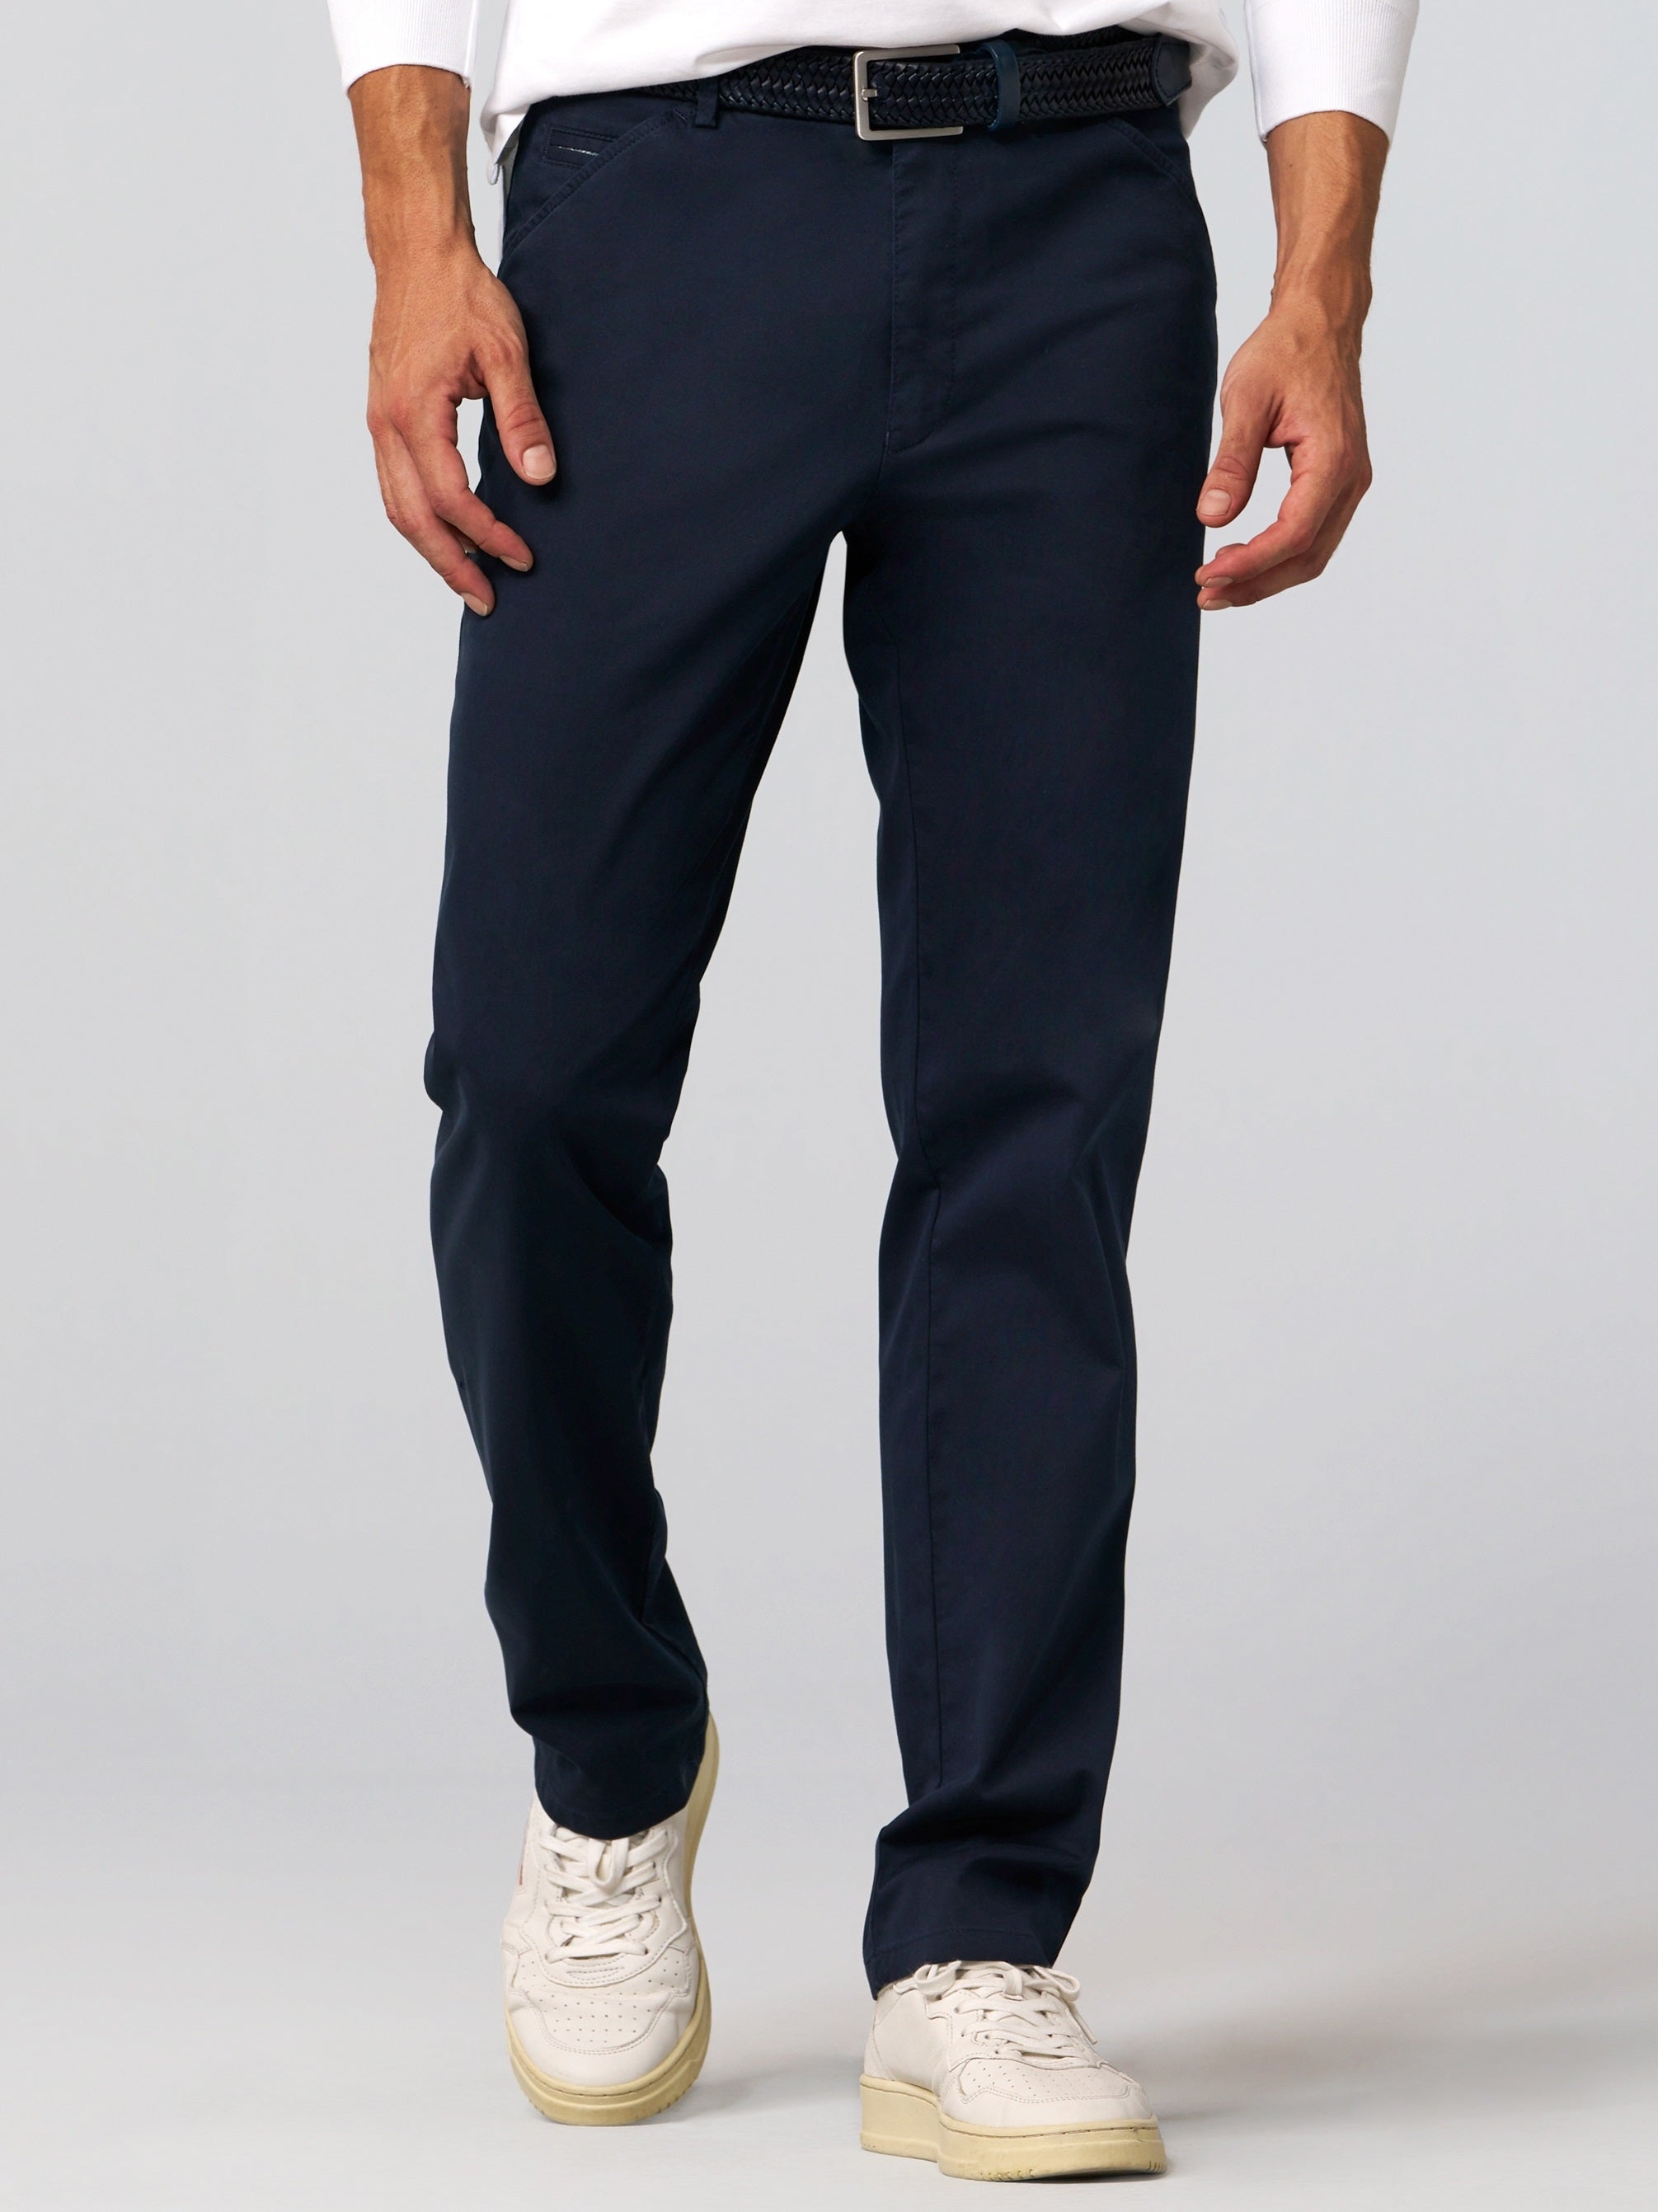 MEYER Chicago Trousers - 5060 Lightweight Cotton Chino - Navy